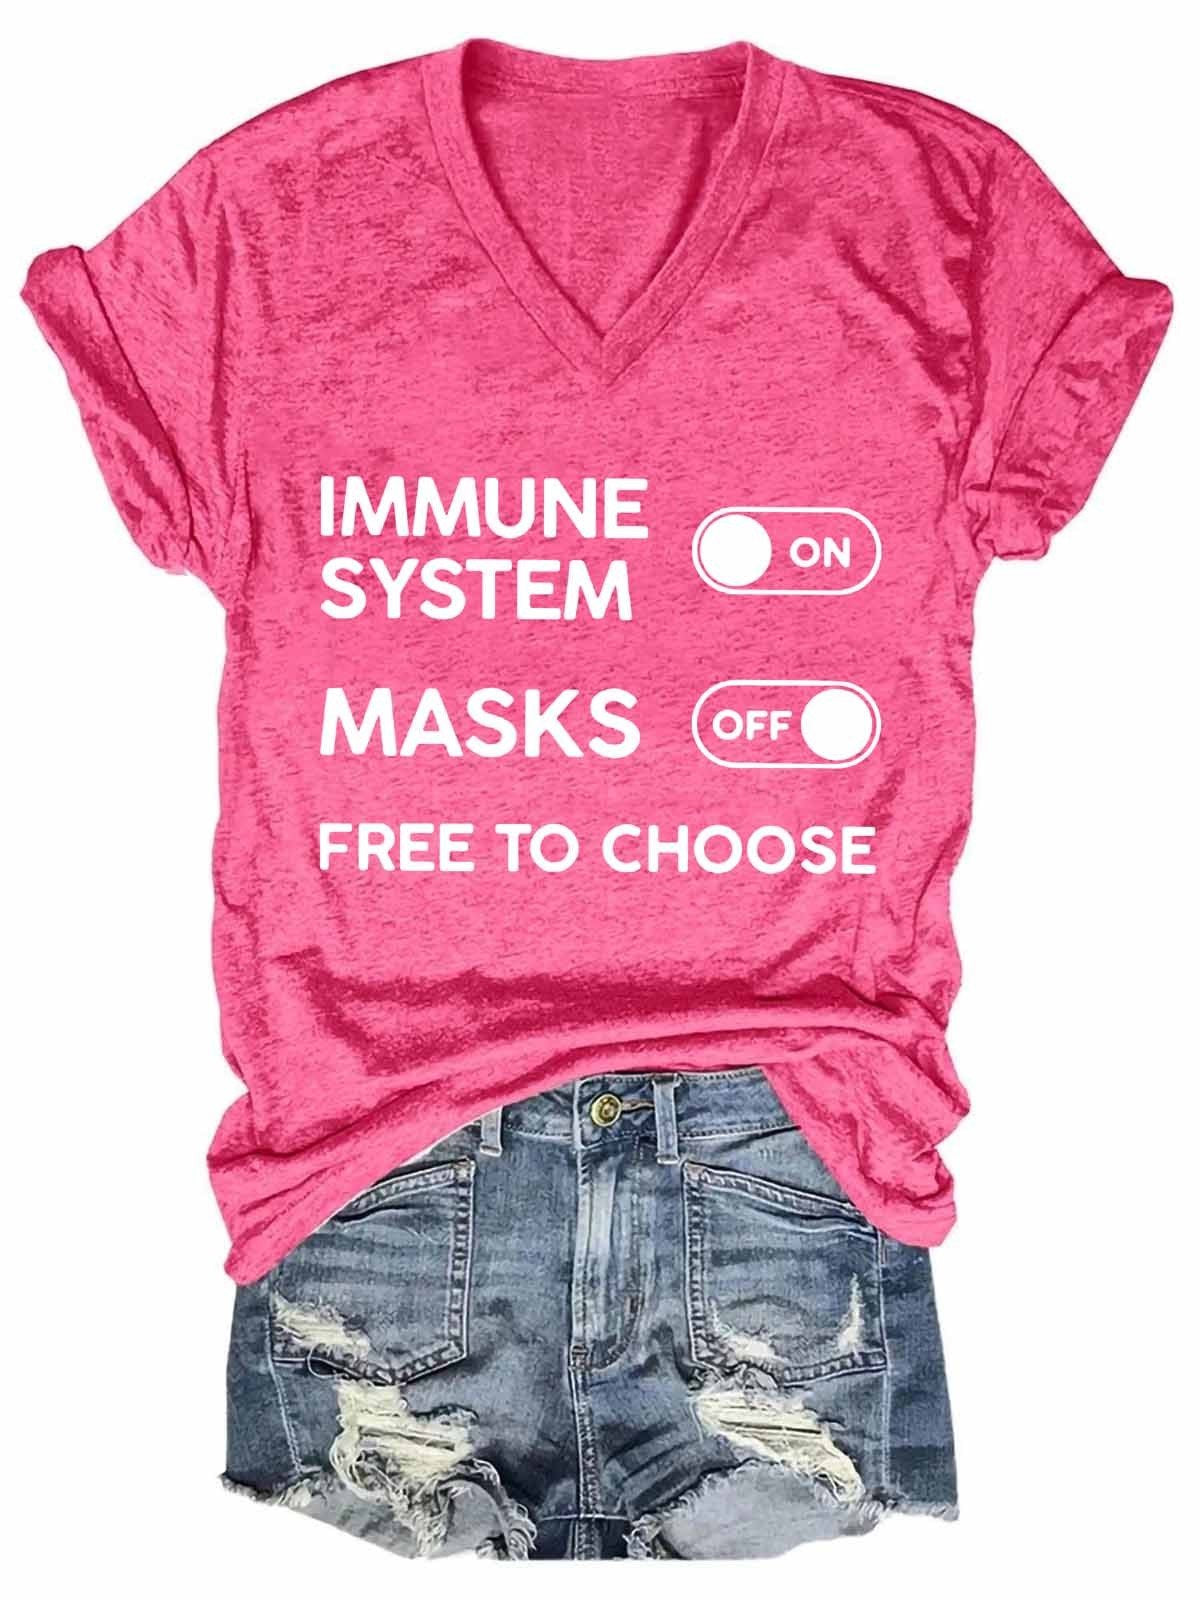 Women's Funny Immune System On Masks Off Free To Choose V-Neck Tee - Outlets Forever